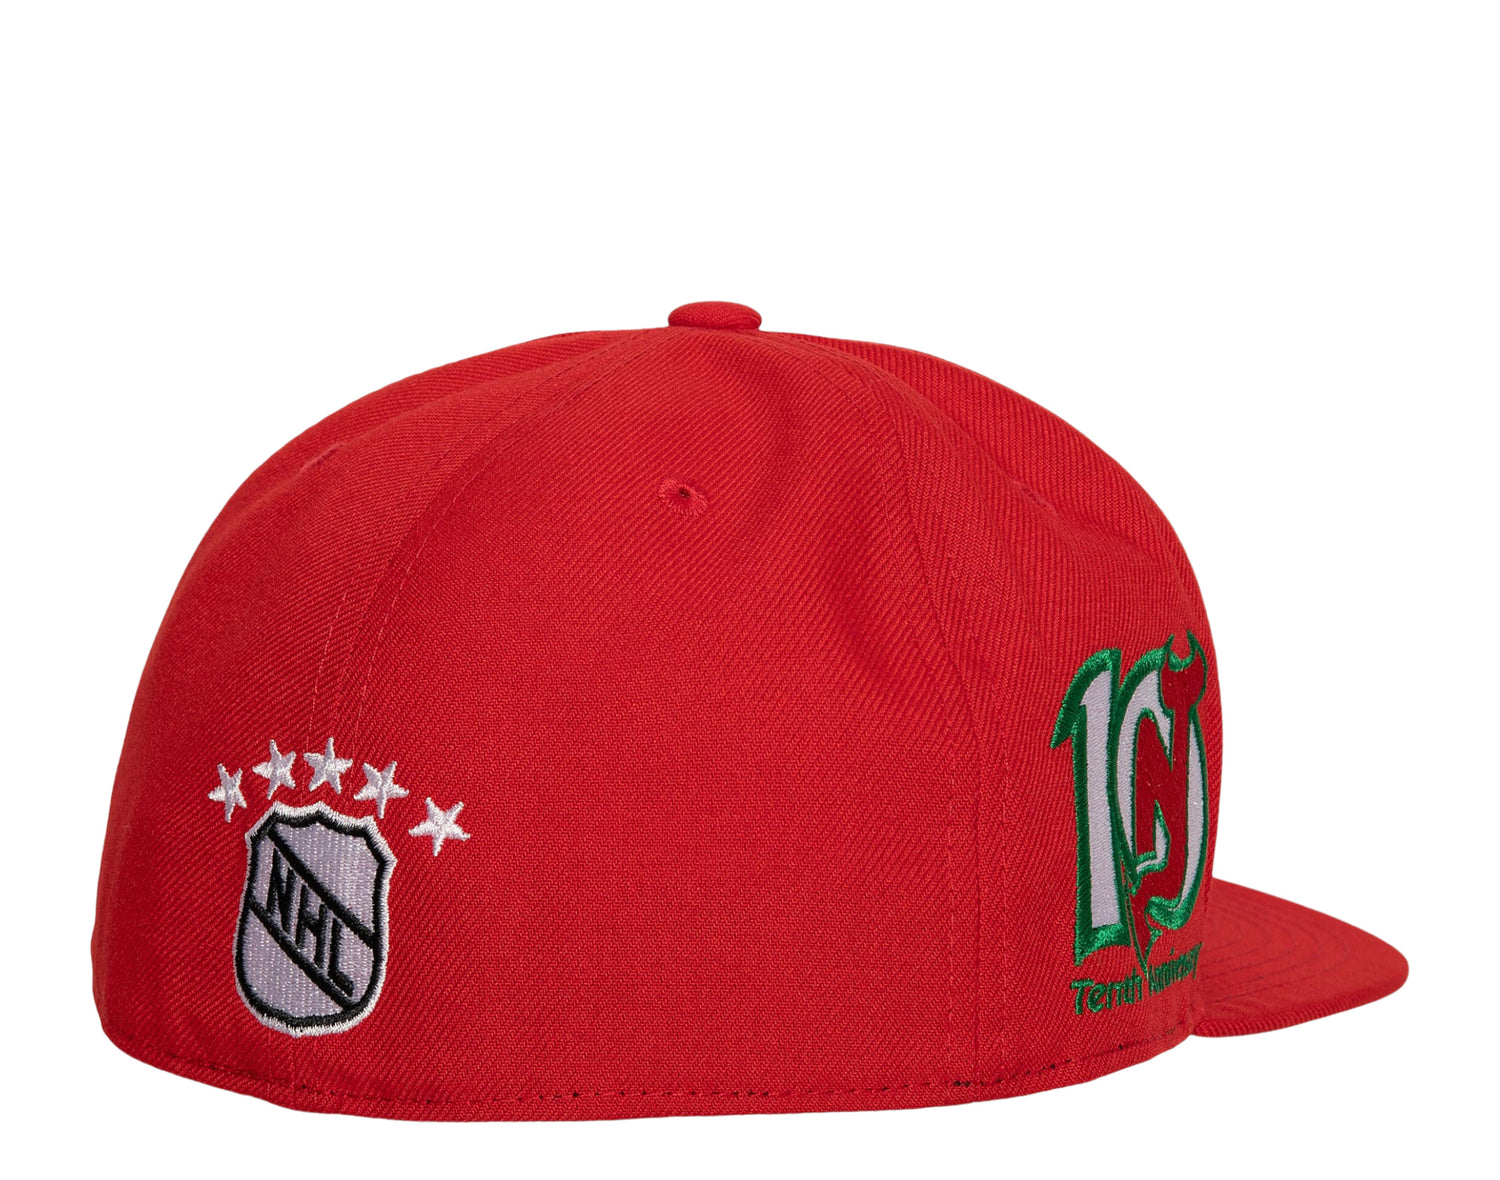 Mitchell & Ness NHL New Jersey Devils Vintage Fitted Hat